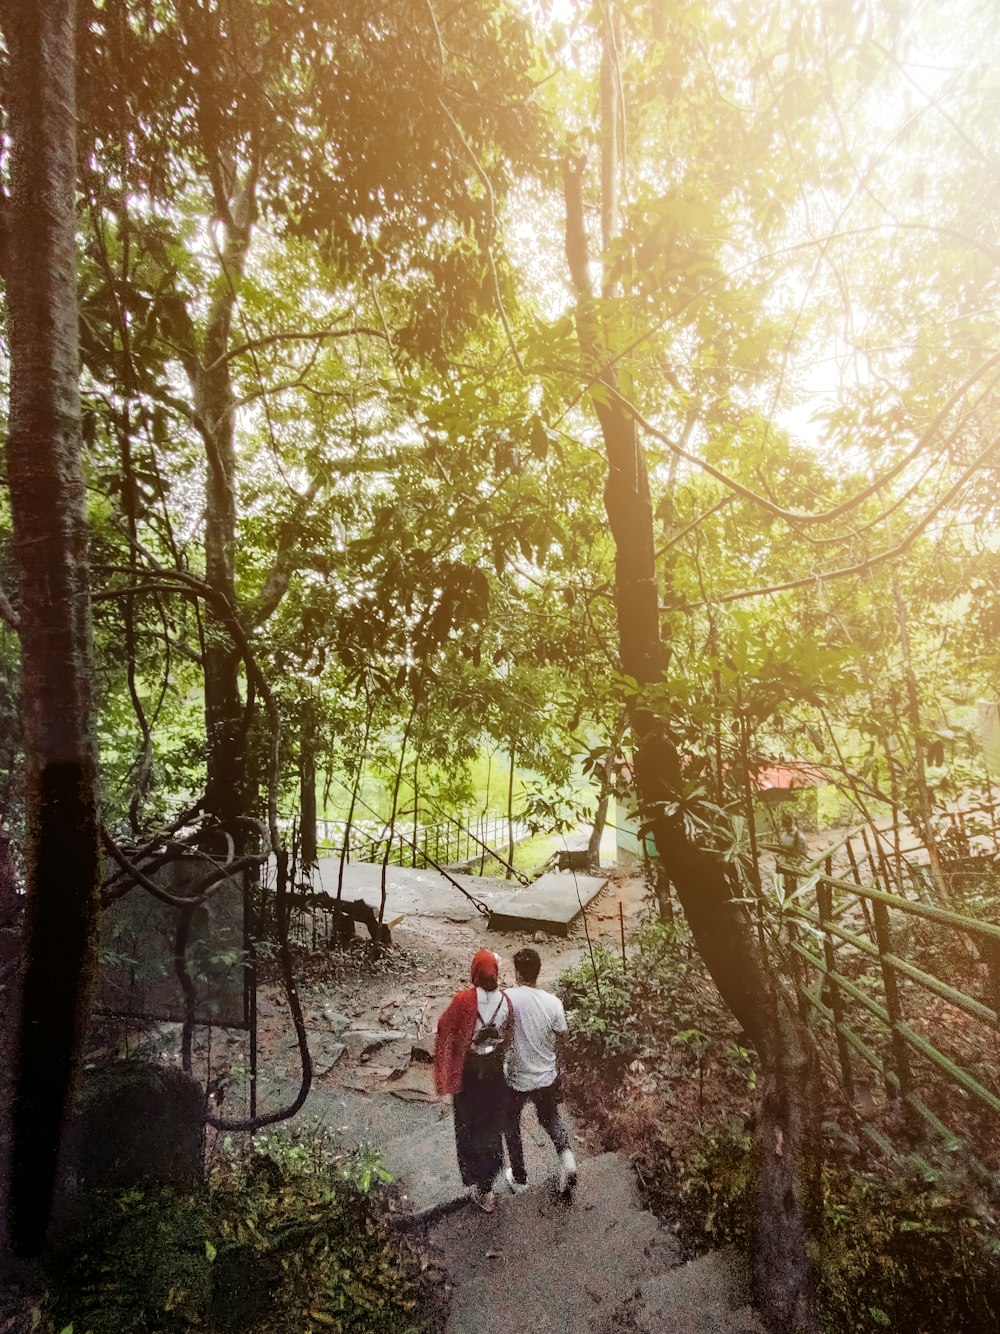 a man and woman walking on a path through a forest